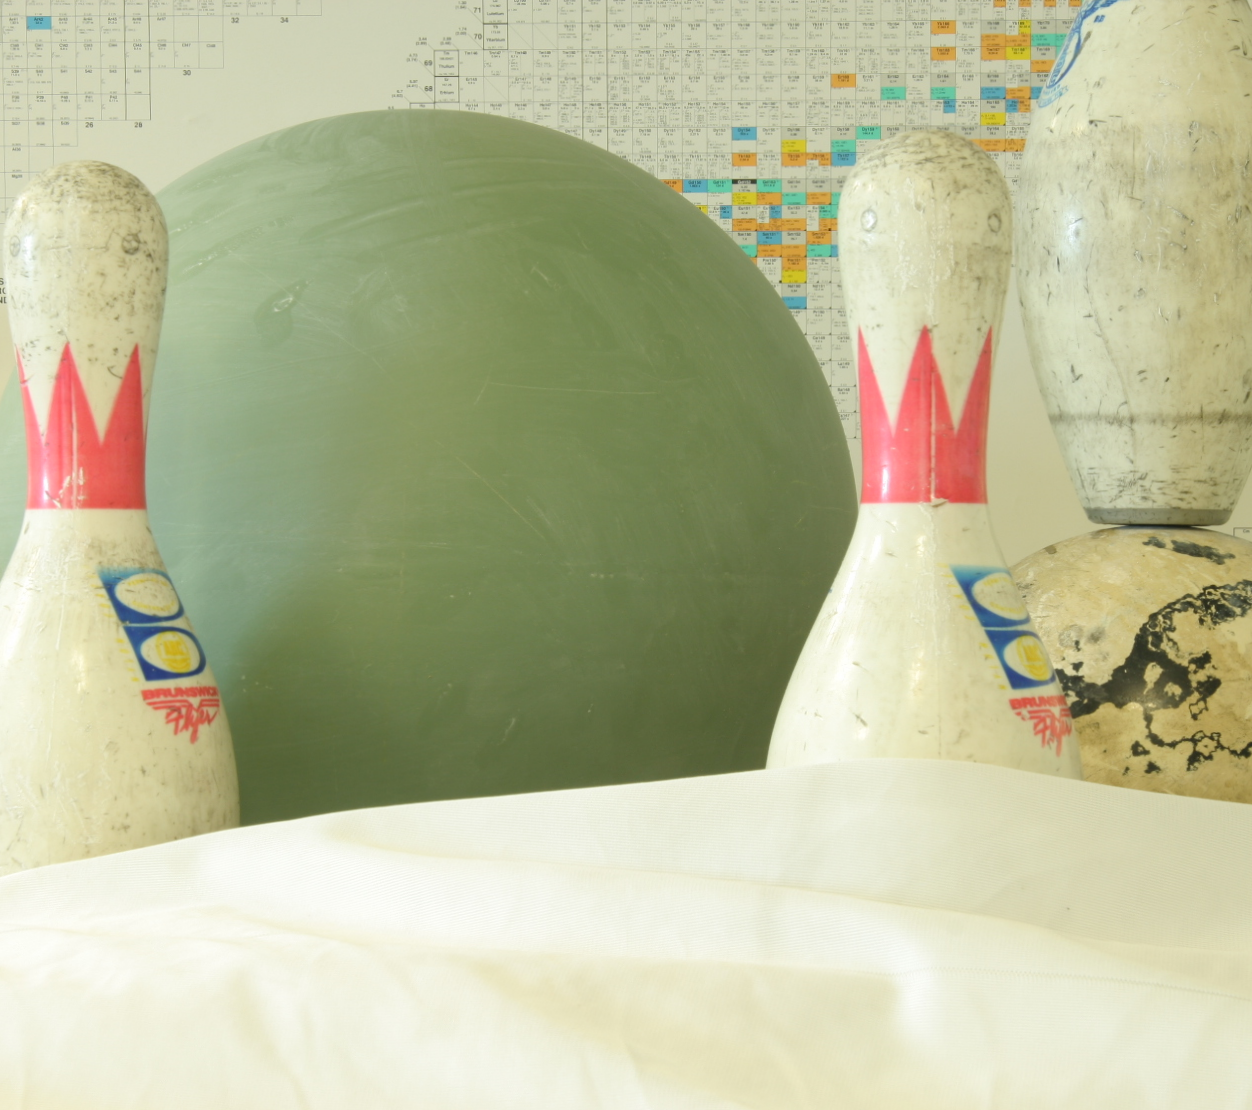  left bowling pins image 